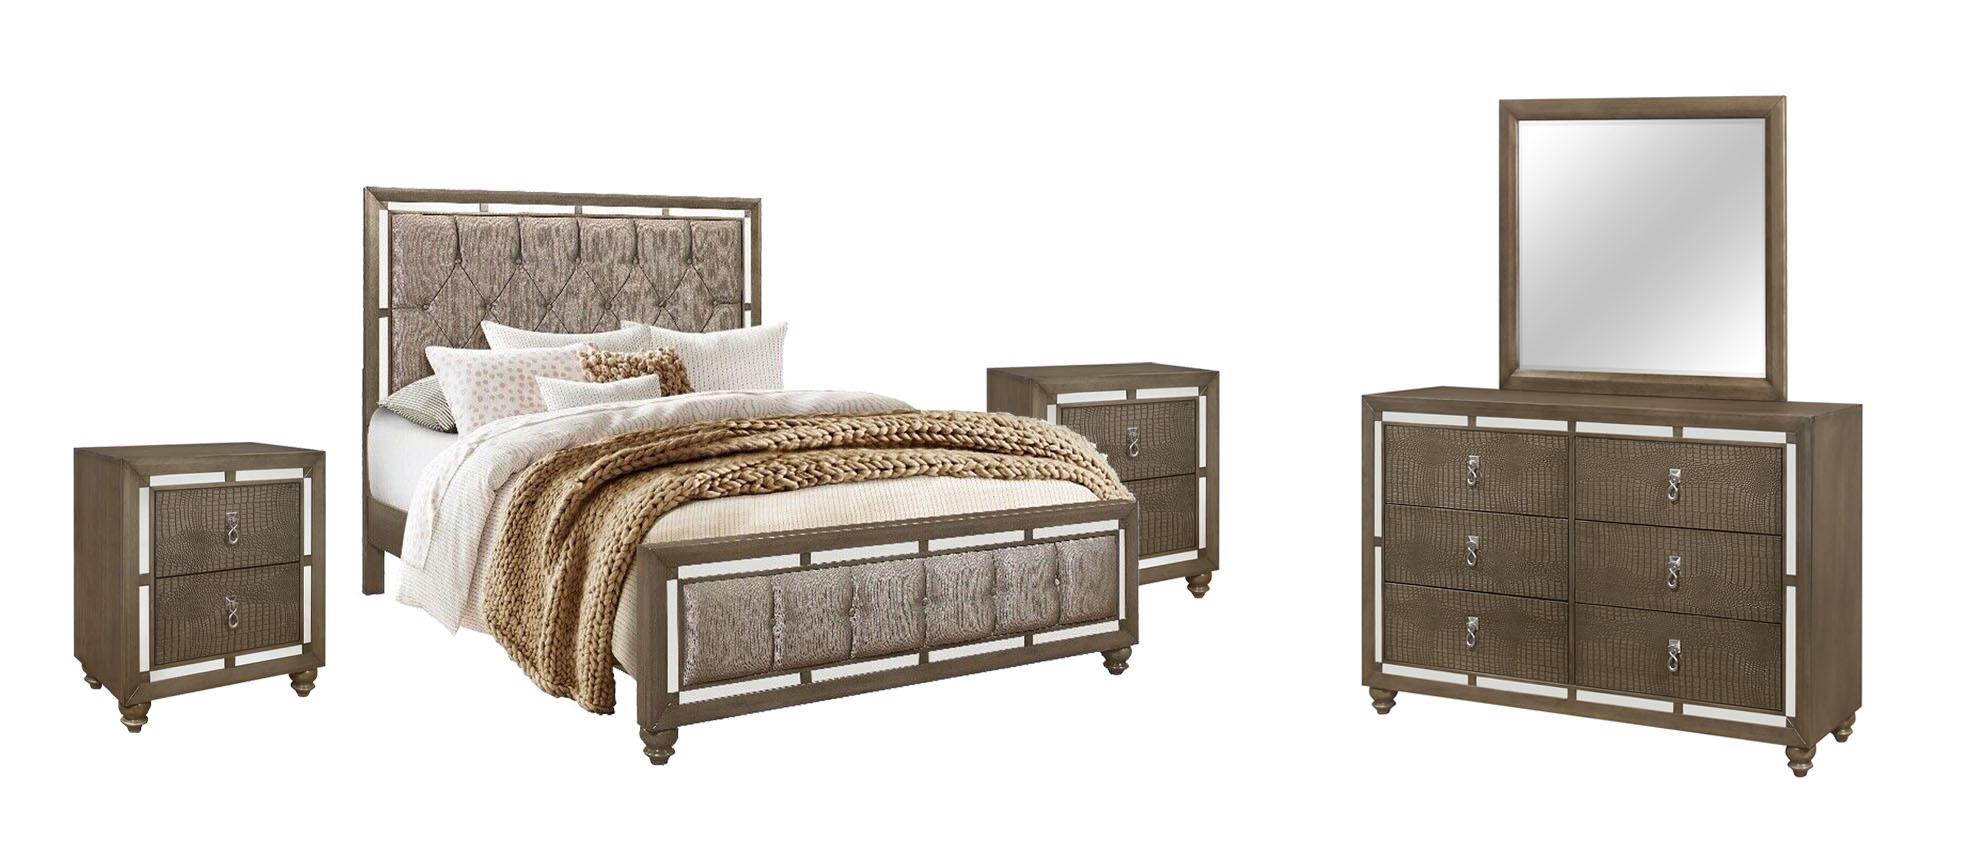 Contemporary Panel Bedroom Set IVY CHAMPAGNE IVY-CHAMPAGNE-QB-Set-5 in Silver, Champagne Fabric